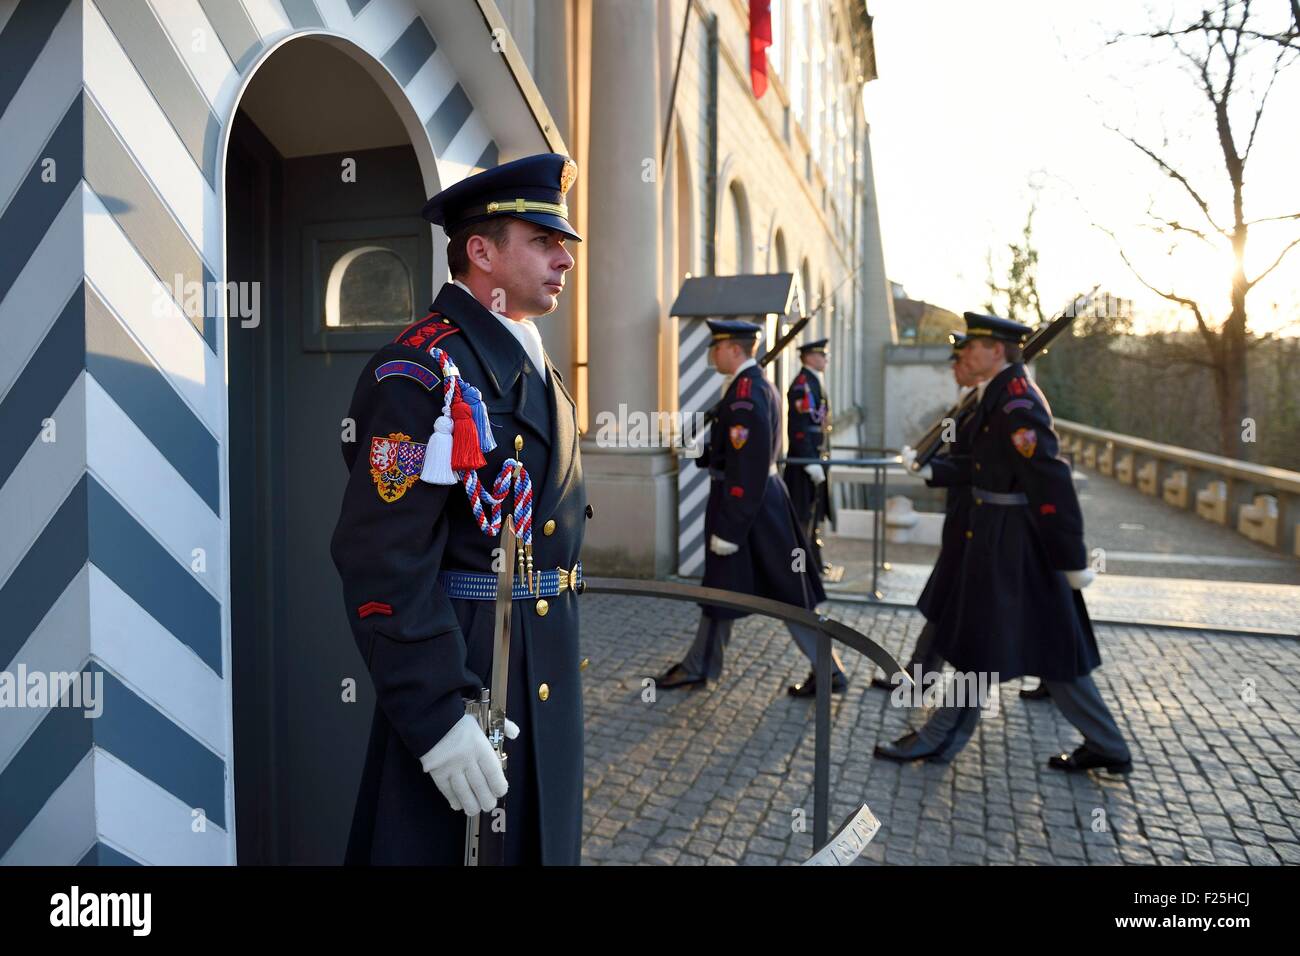 Czech Republic, Prague, Hradcany (Castle district), guard at the entrance of royal castle, changing of the Guard Stock Photo